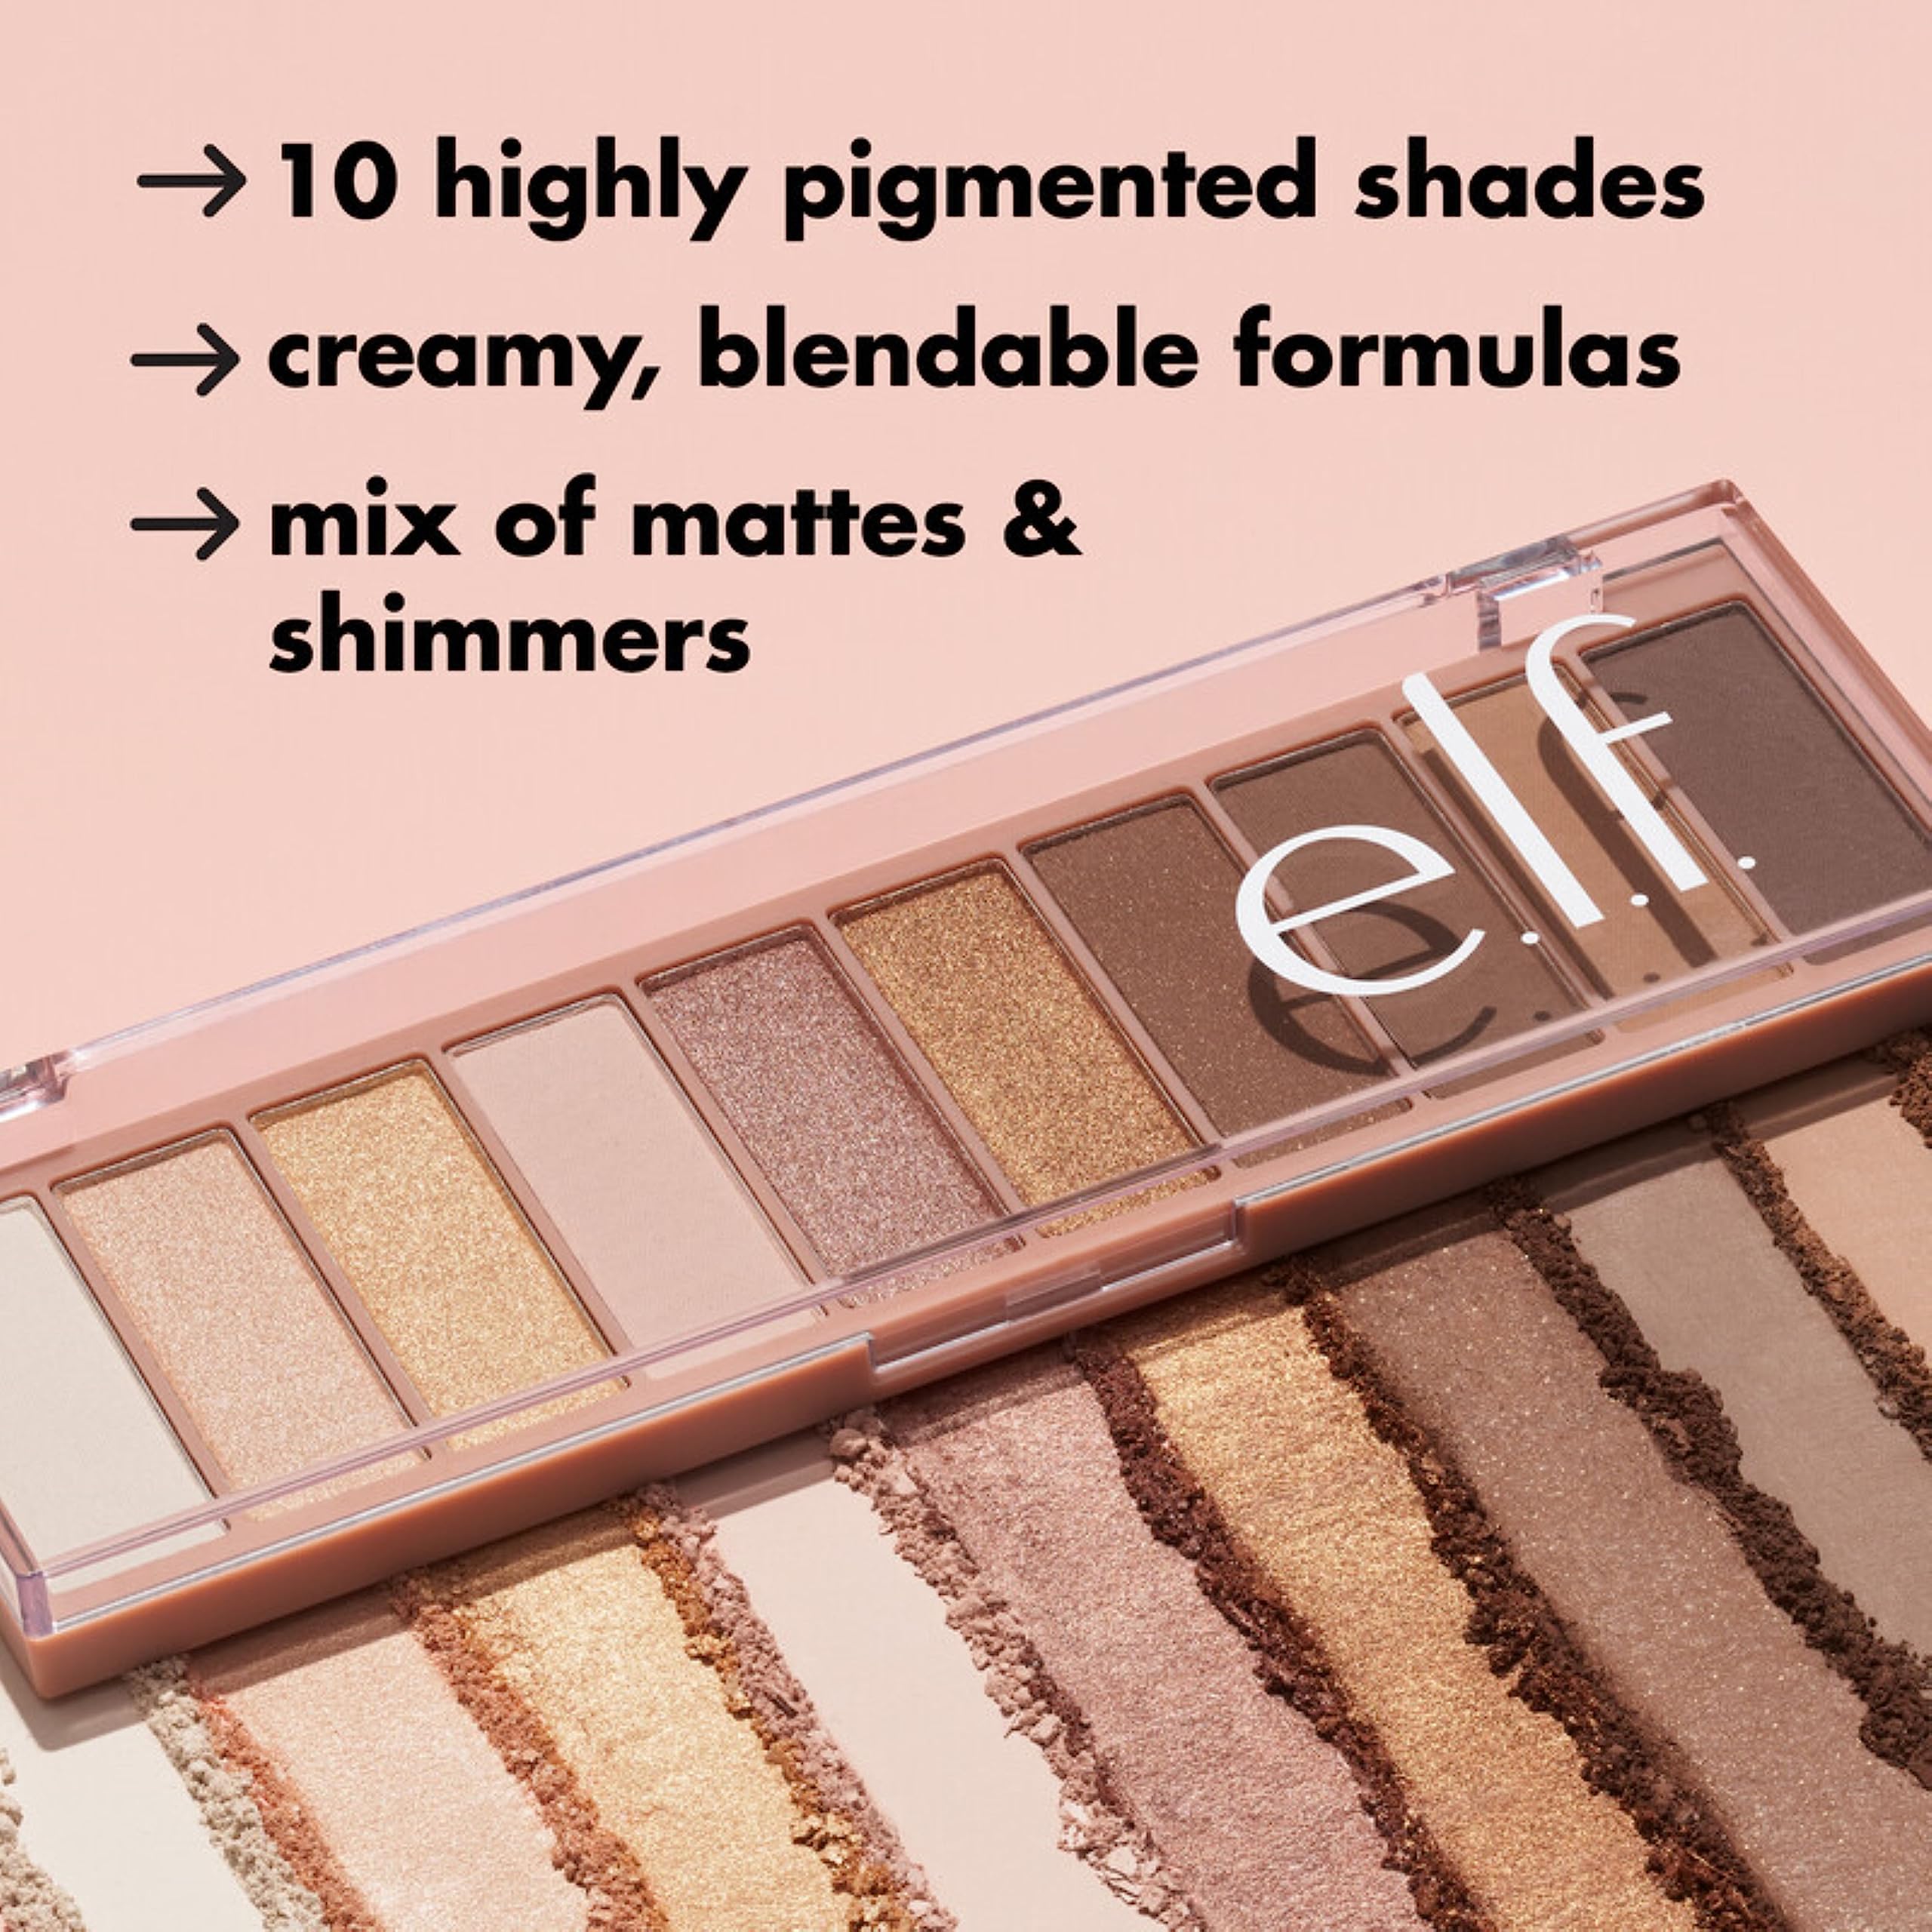 e.l.f. Perfect 10 Eyeshadow Palette, Ten Ultra-pigmented Neutral Shades, Smooth, Creamy & Blendable Formula, Vegan & Cruelty-free, Summer Breeze